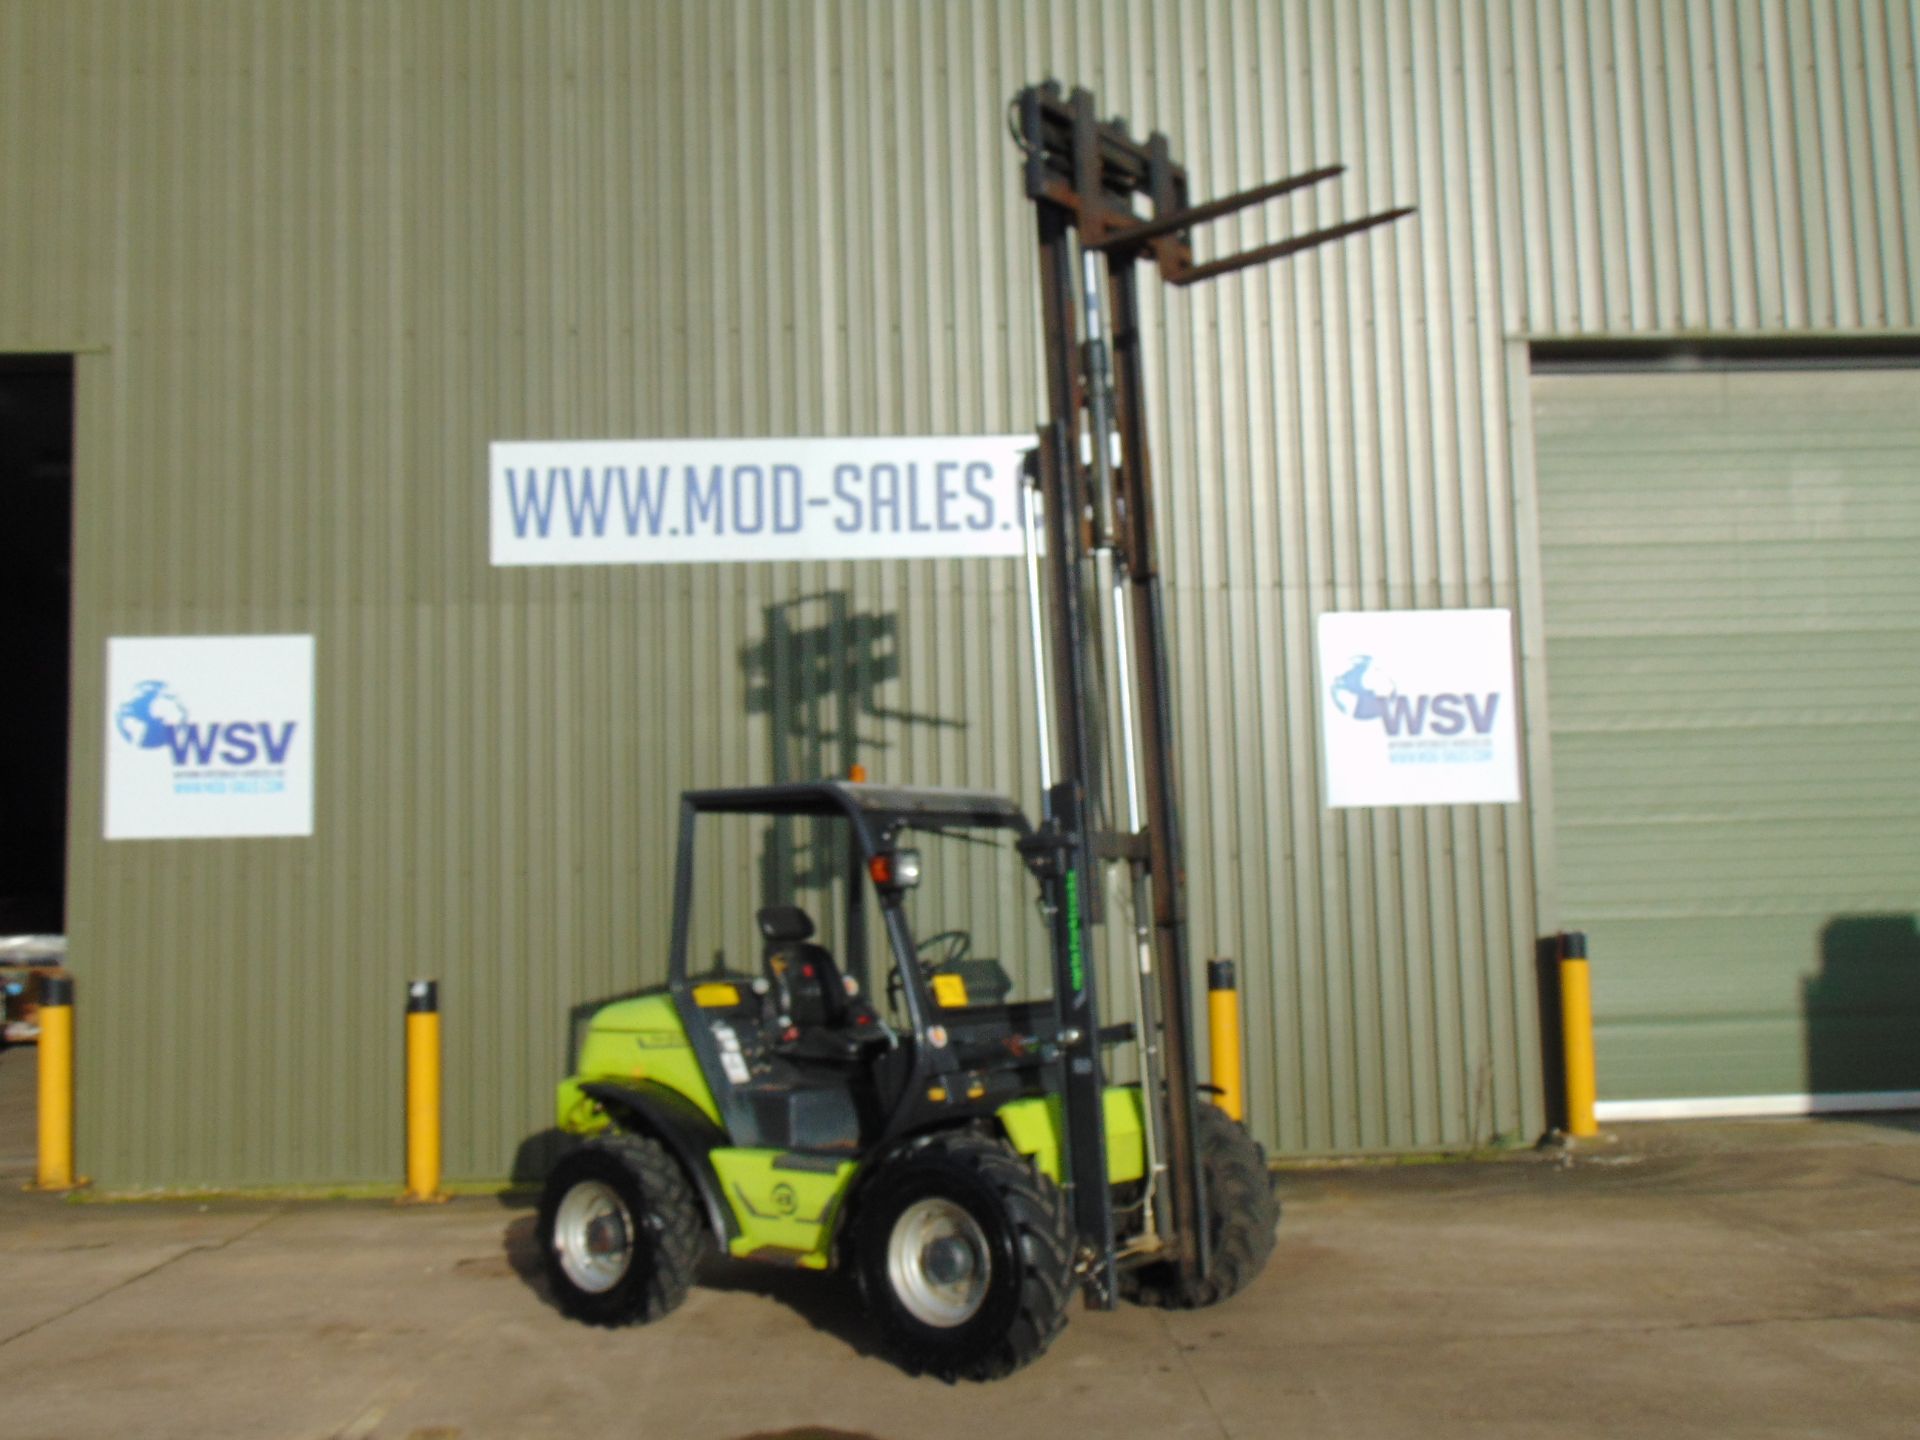 2011 Agrimac Agria TH210 4x4 Rough Terrain Diesel Forklift ONLY 1,918 HOURS!!! - Image 10 of 30